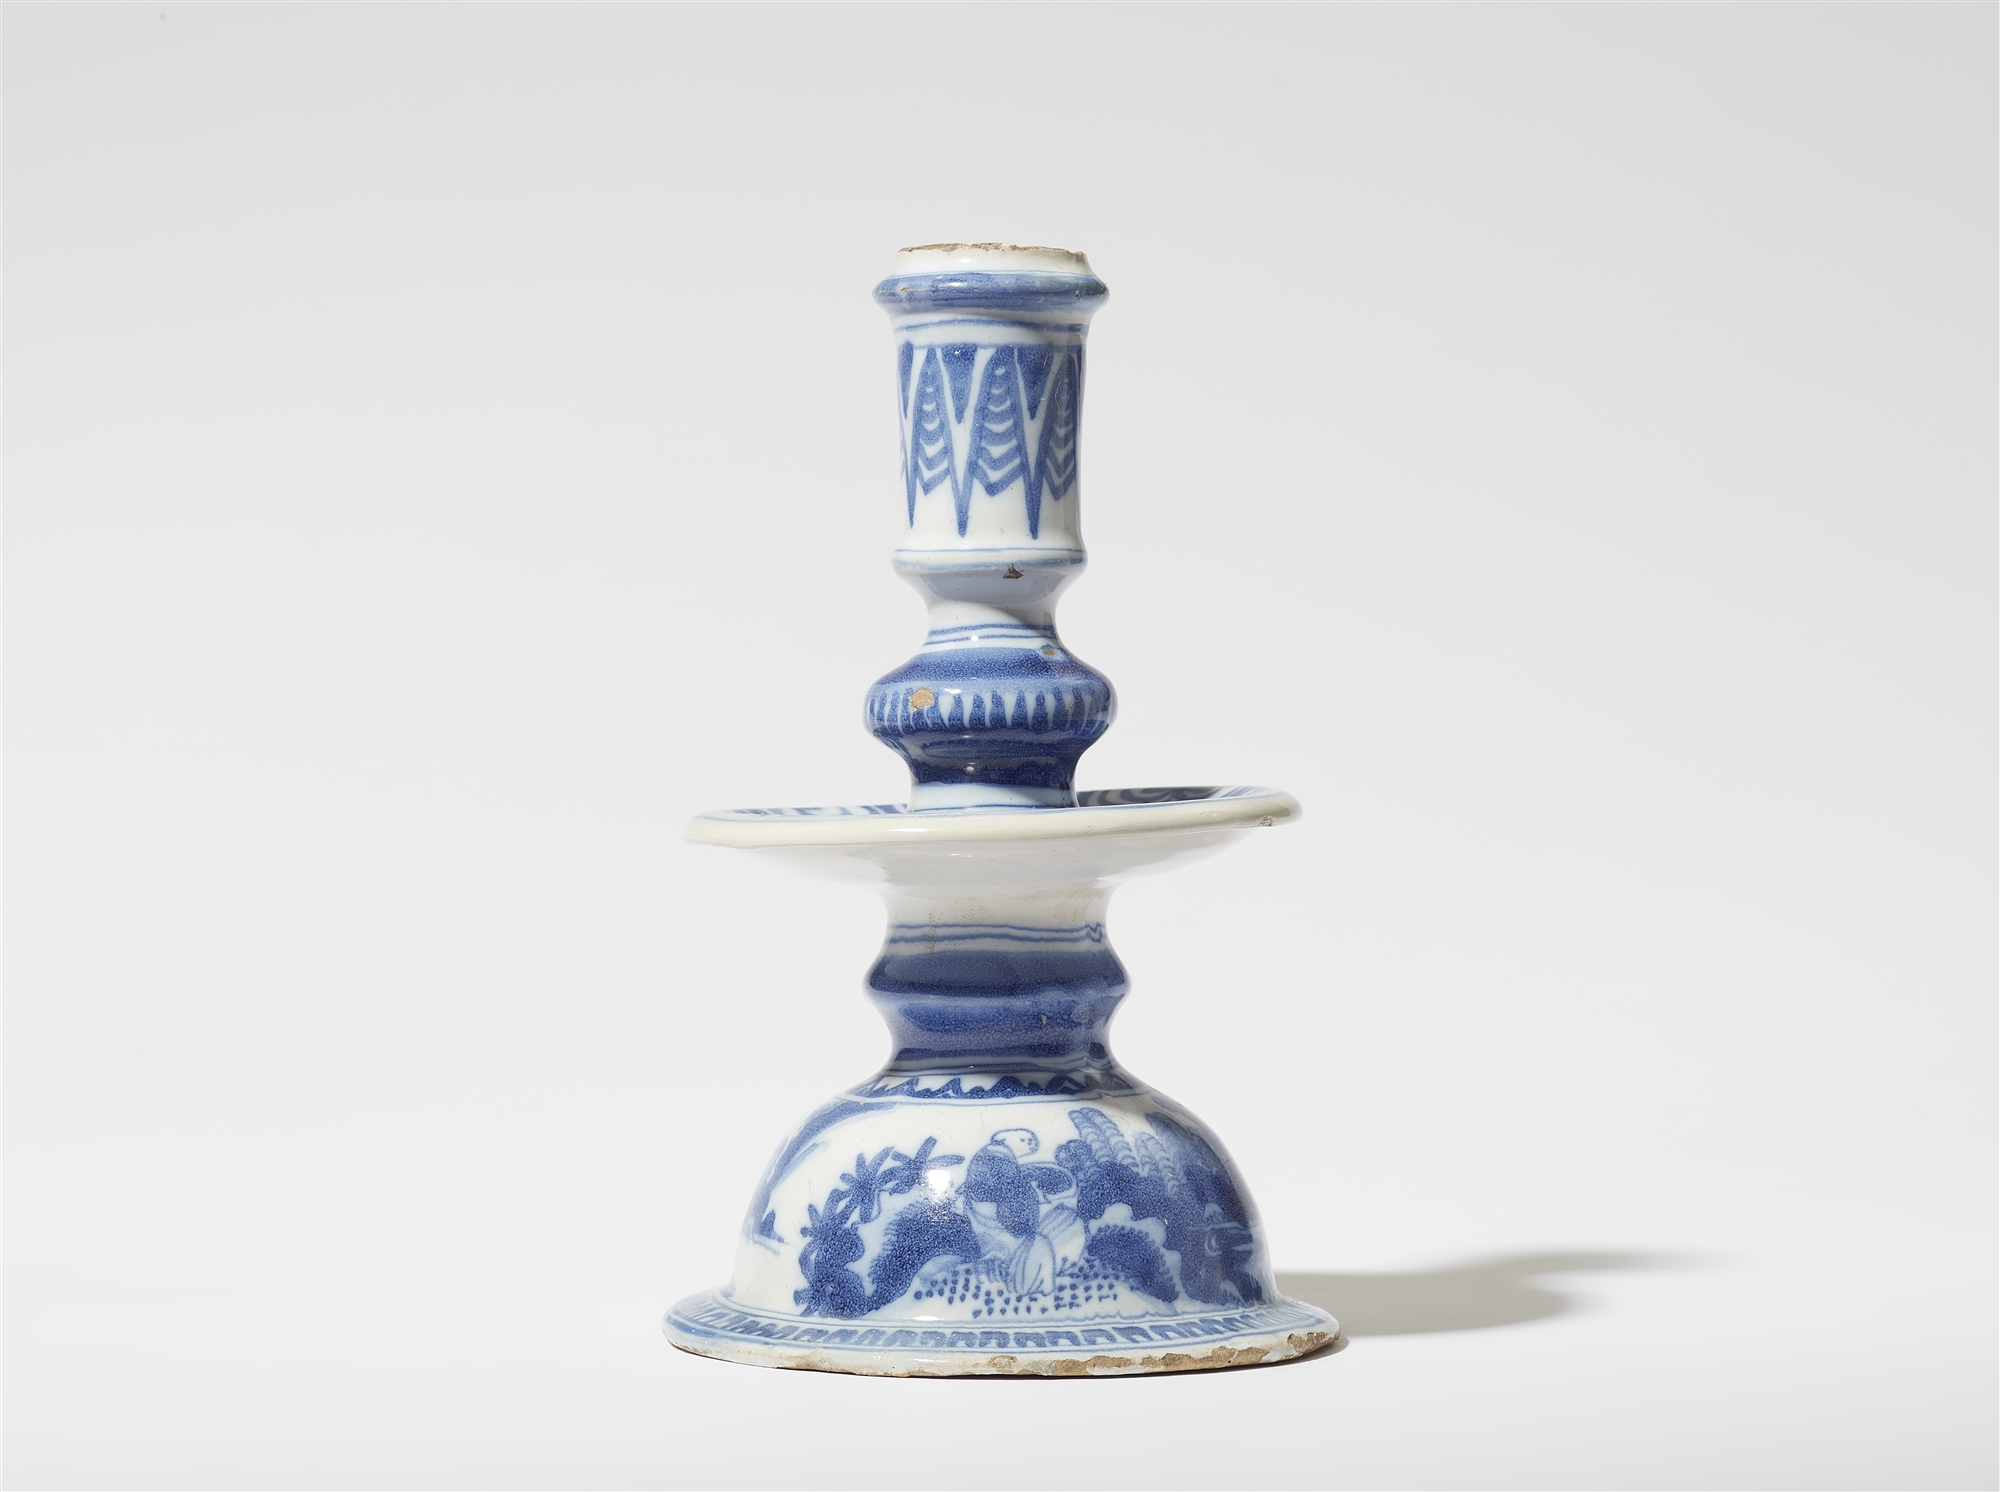 A faience candlestick with Chinoiserie decor